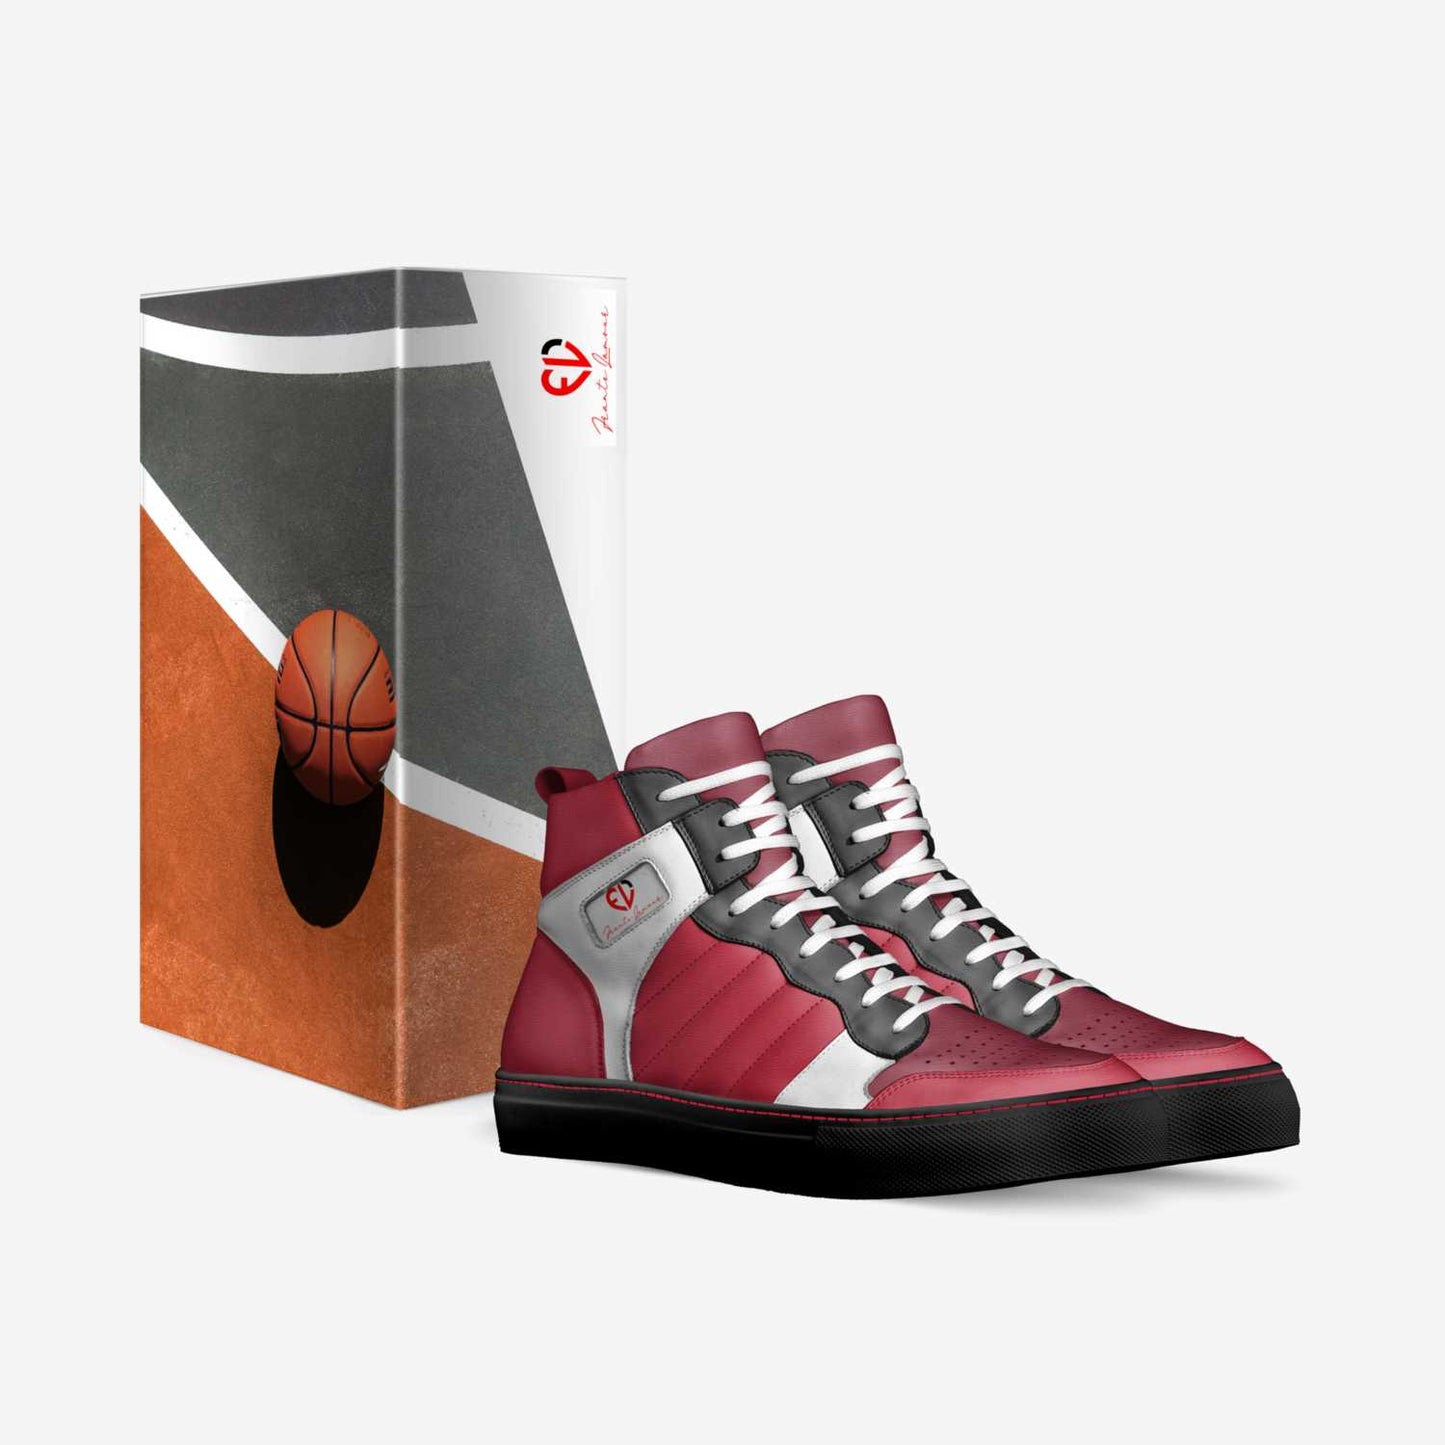 Haiti Retro Basketball By Frantz Lamour - Men's High Top Genuine Leather Lace Up Shoes - Black & Red